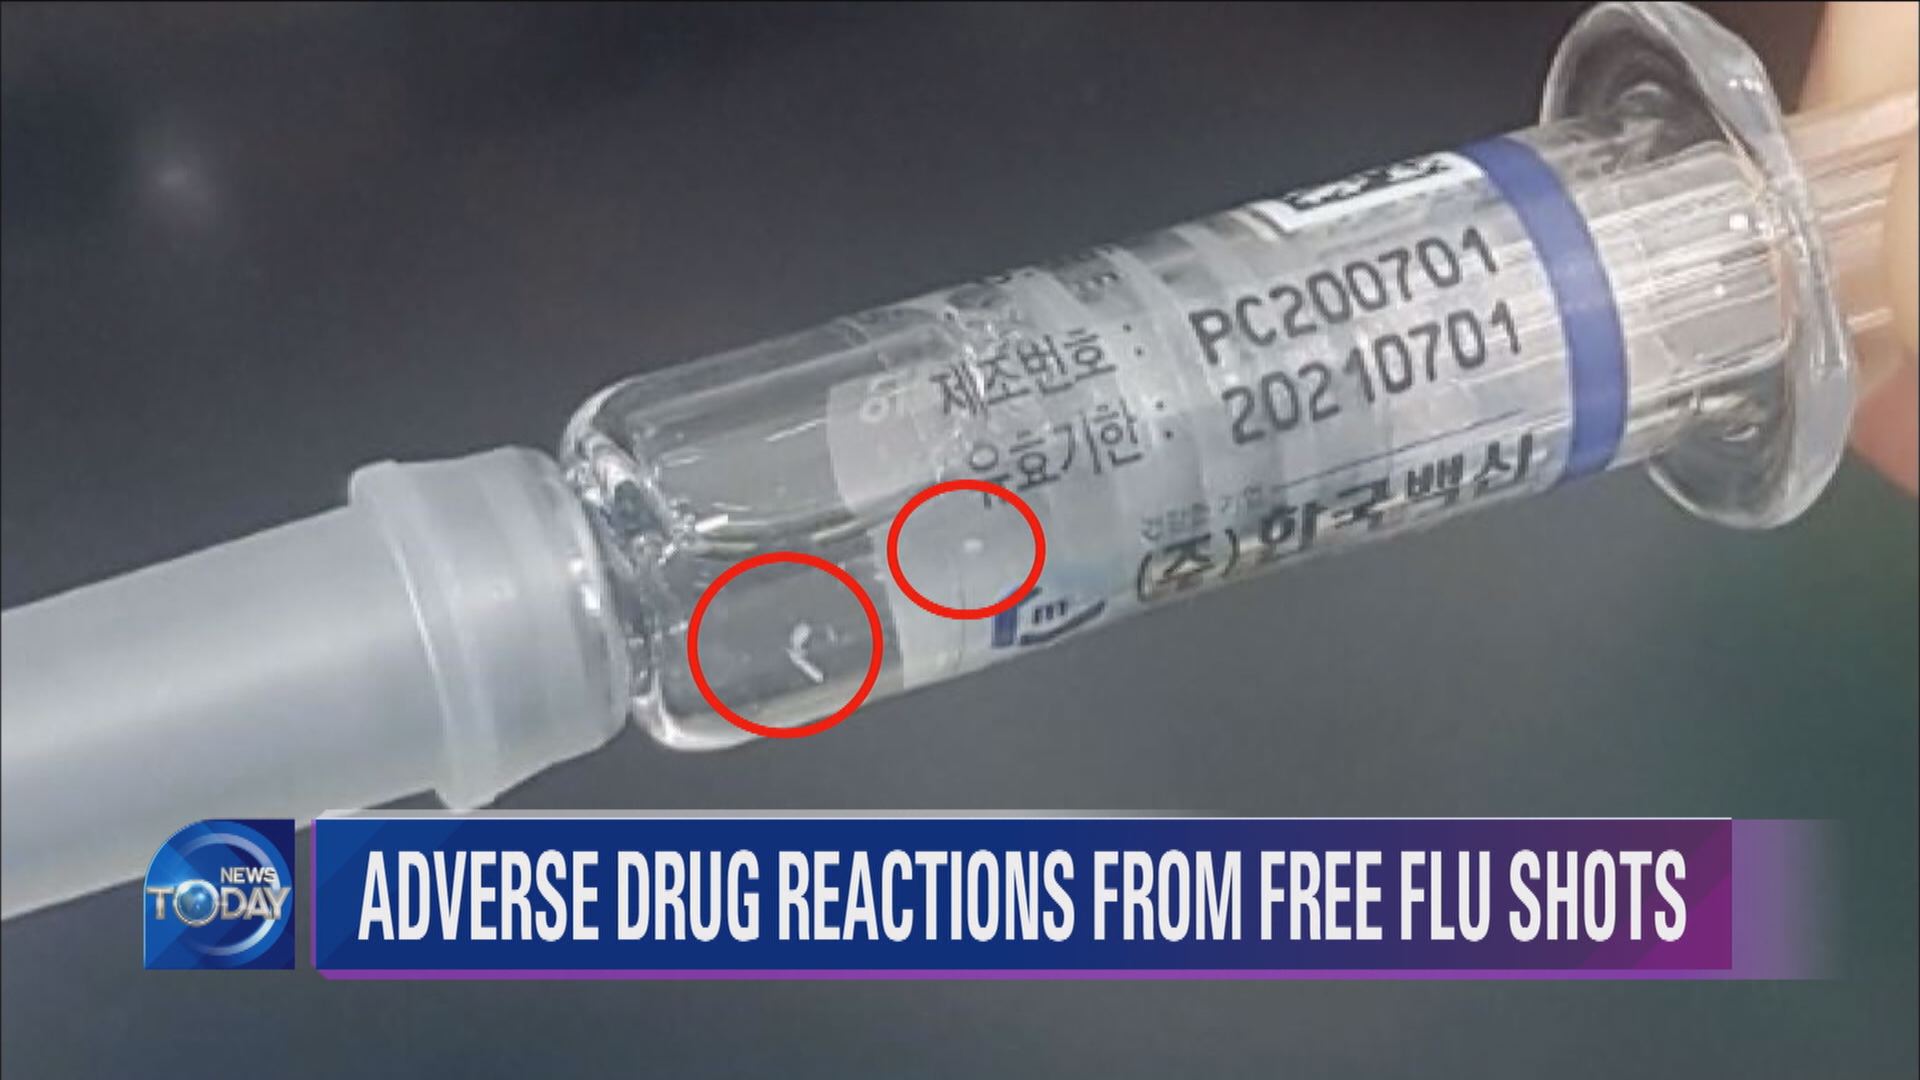 ADVERSE DRUG REACTIONS FROM FREE FLU SHOTS